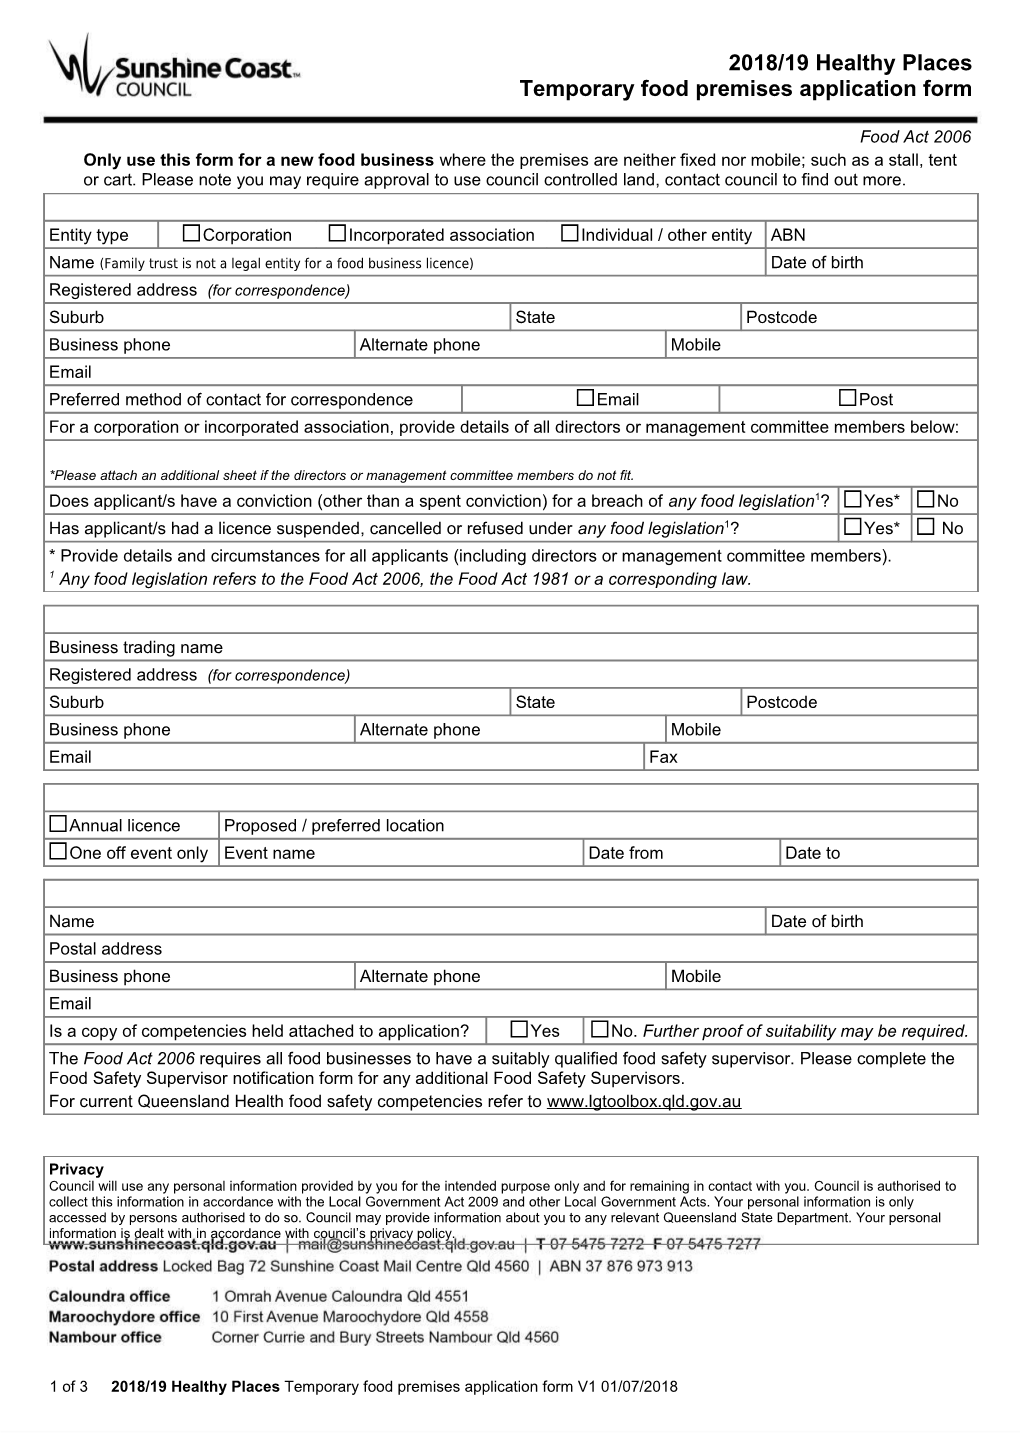 1 of 32018/19 Healthy Placestemporary Food Premises Application Formv1 01/07/2018